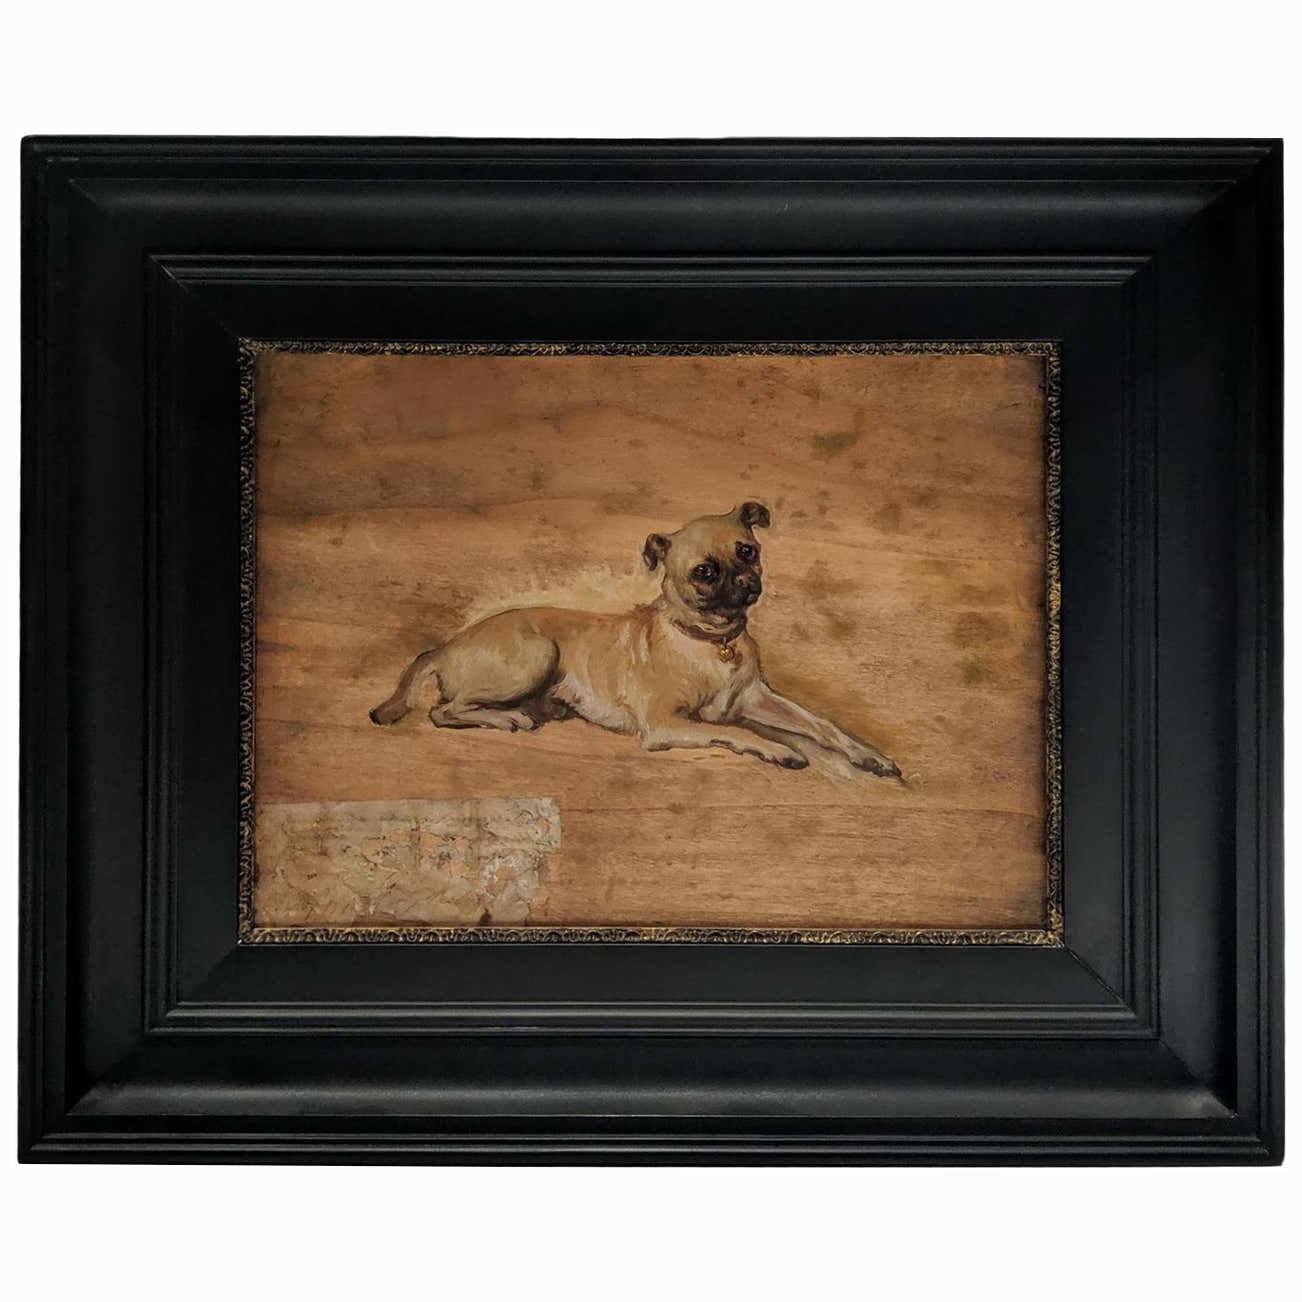 Late 19th Century Oil on Board "Study of a Pug", by Tony Robert-Fleury